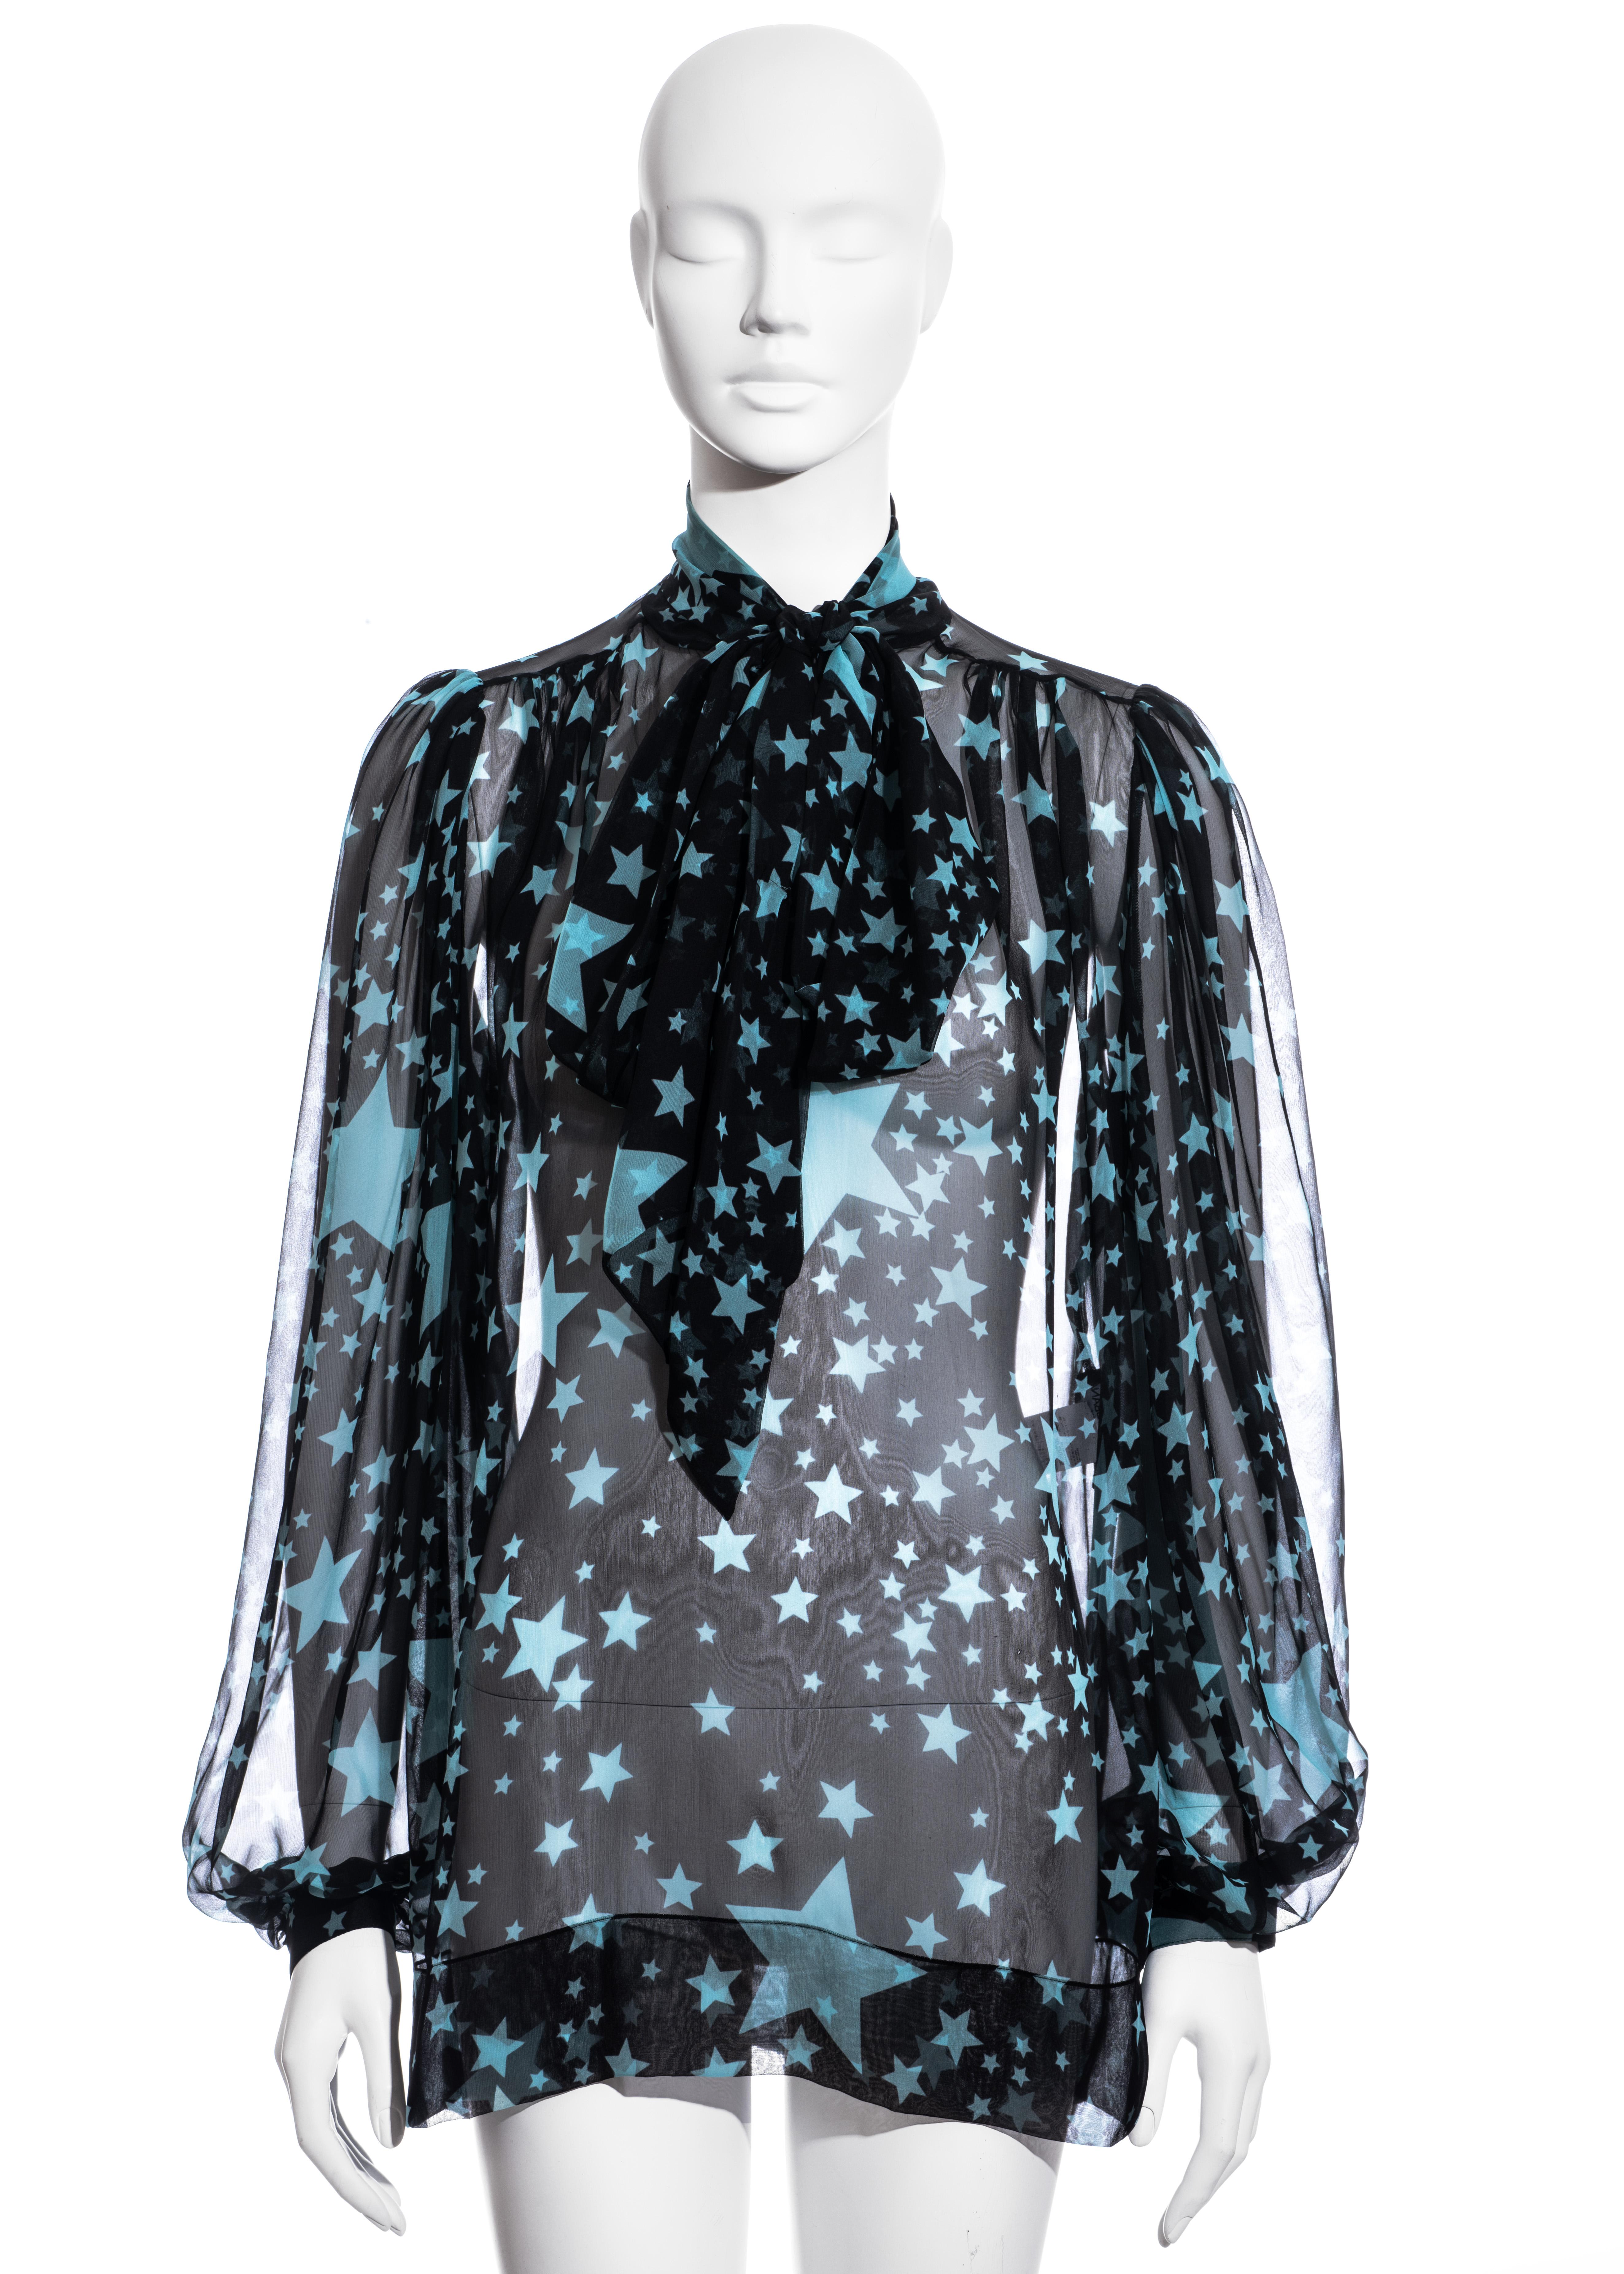 ▪ Dolce & Gabbana chiffon poet blouse
▪ 100% Silk
▪ Black and blue star print
▪ Pussy-bow ties
▪ Fitted cuffs
▪ Loose fit
▪ IT 42 - FR 38 - UK 10 - US 6
▪ Fall-Winter 2011